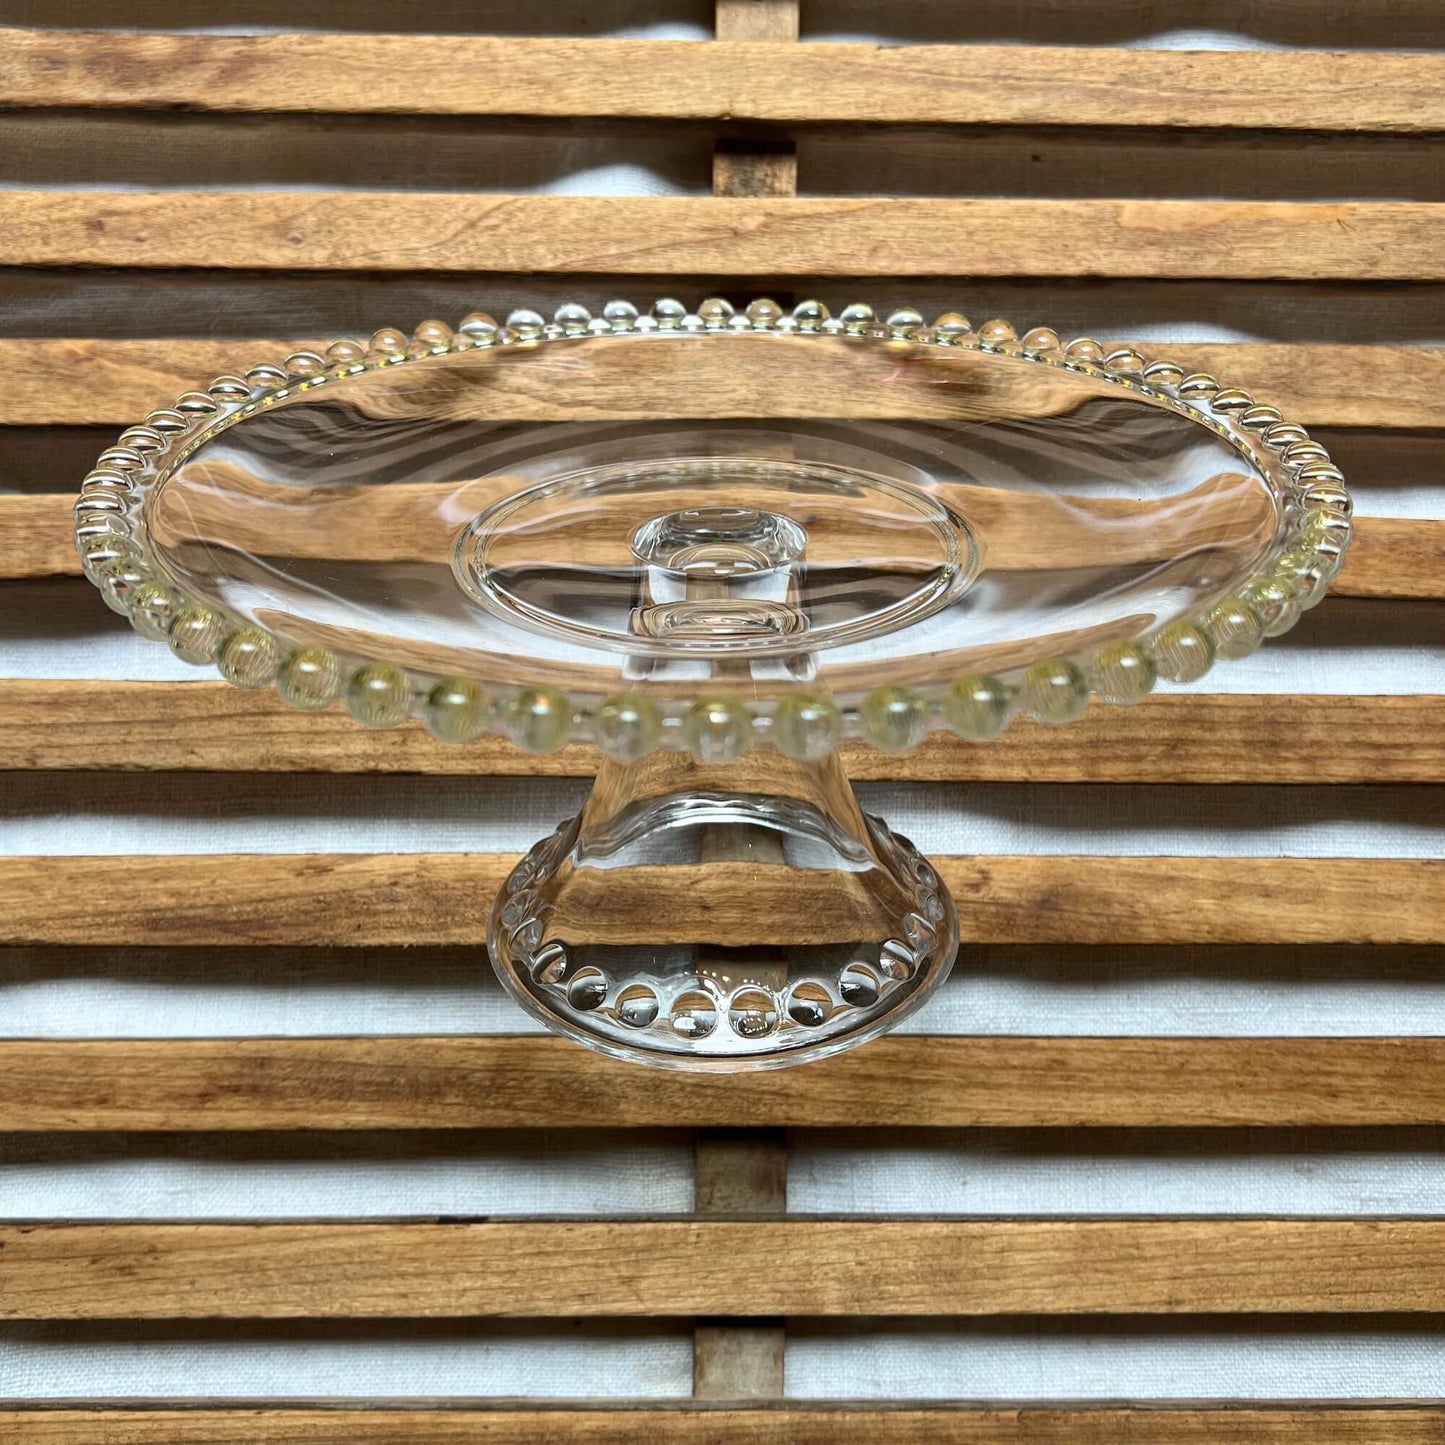 Glass cake stands - Assorted sizes - Vintage